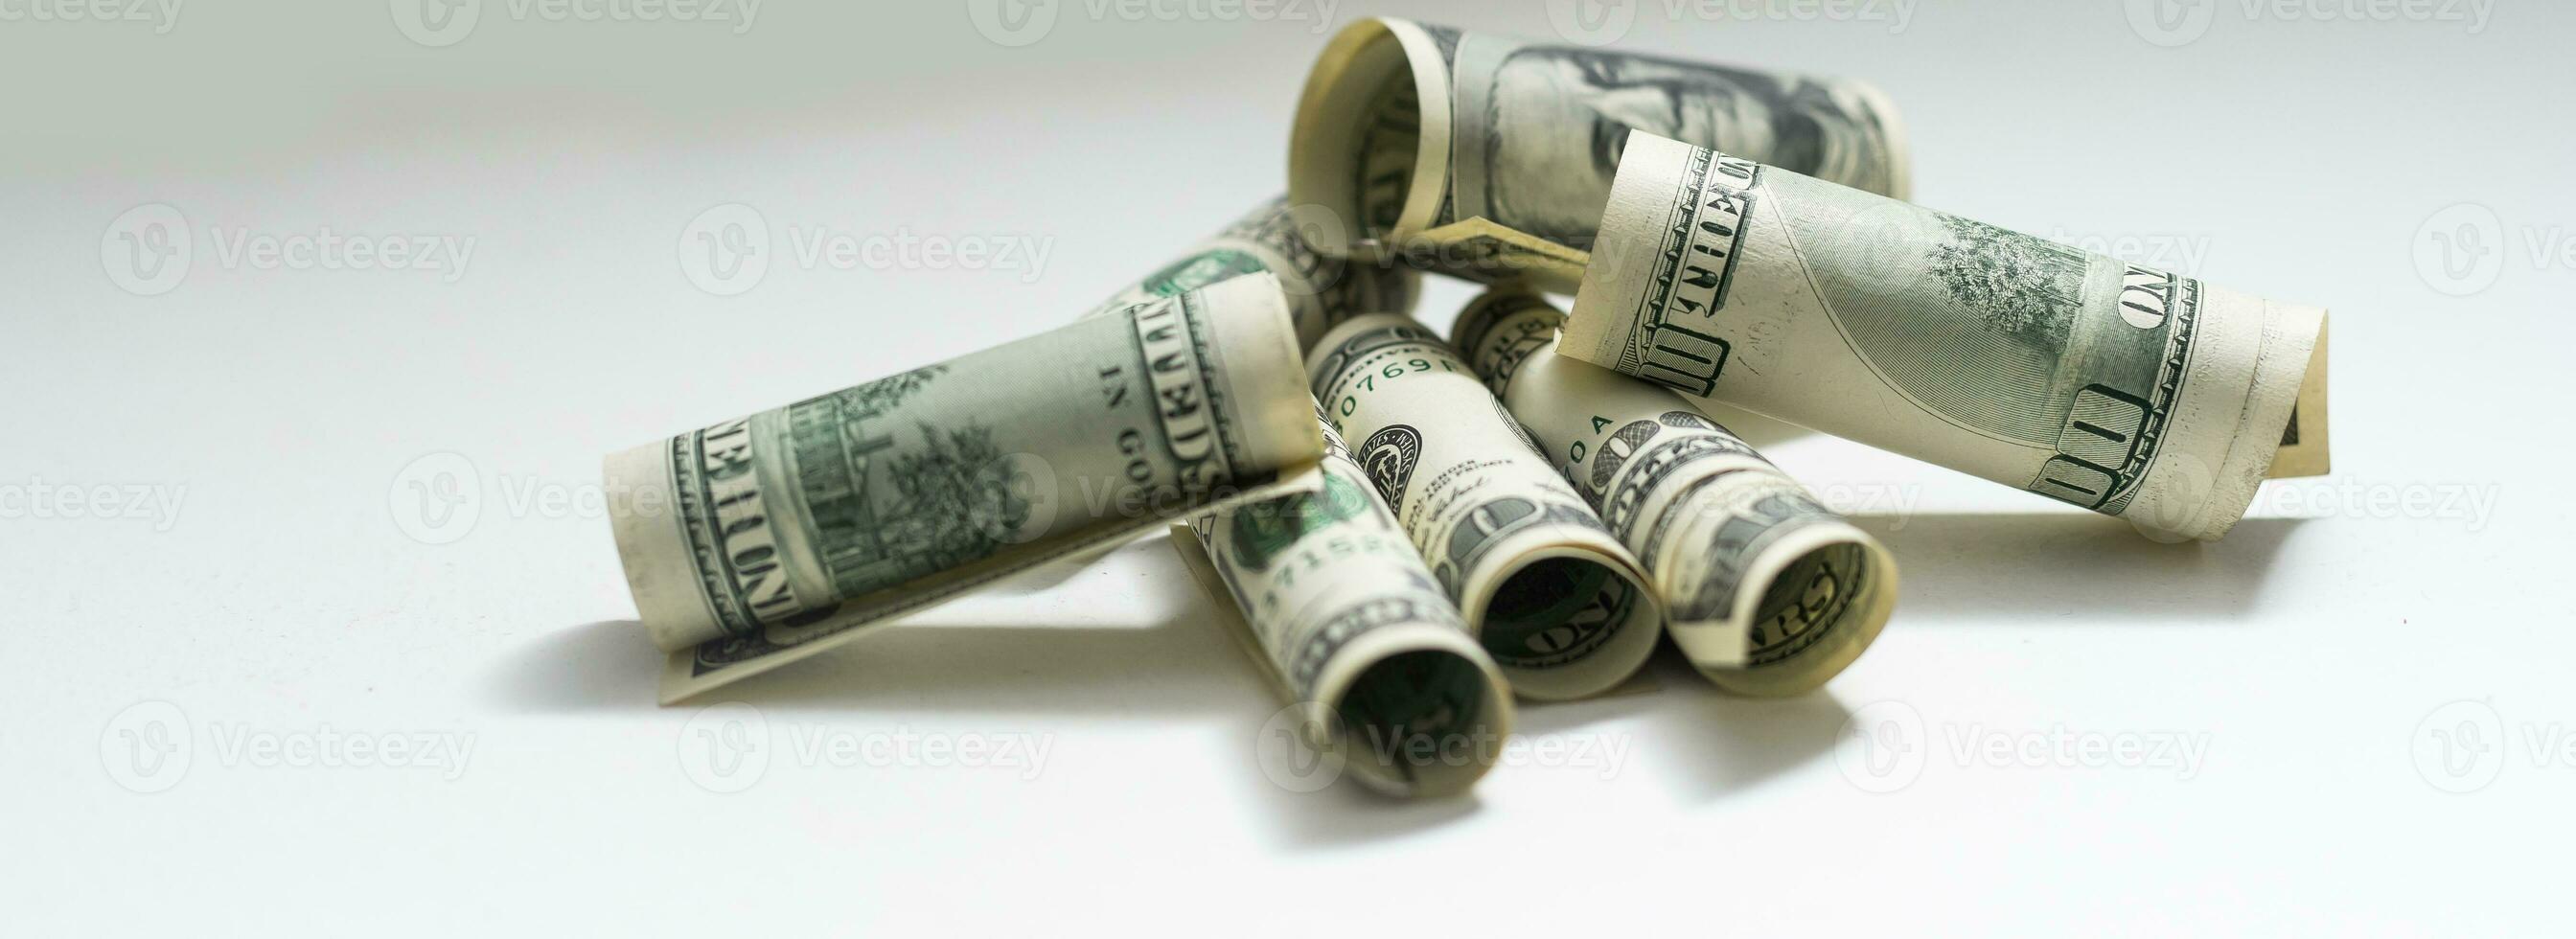 roles dollar notes in front of white background photo